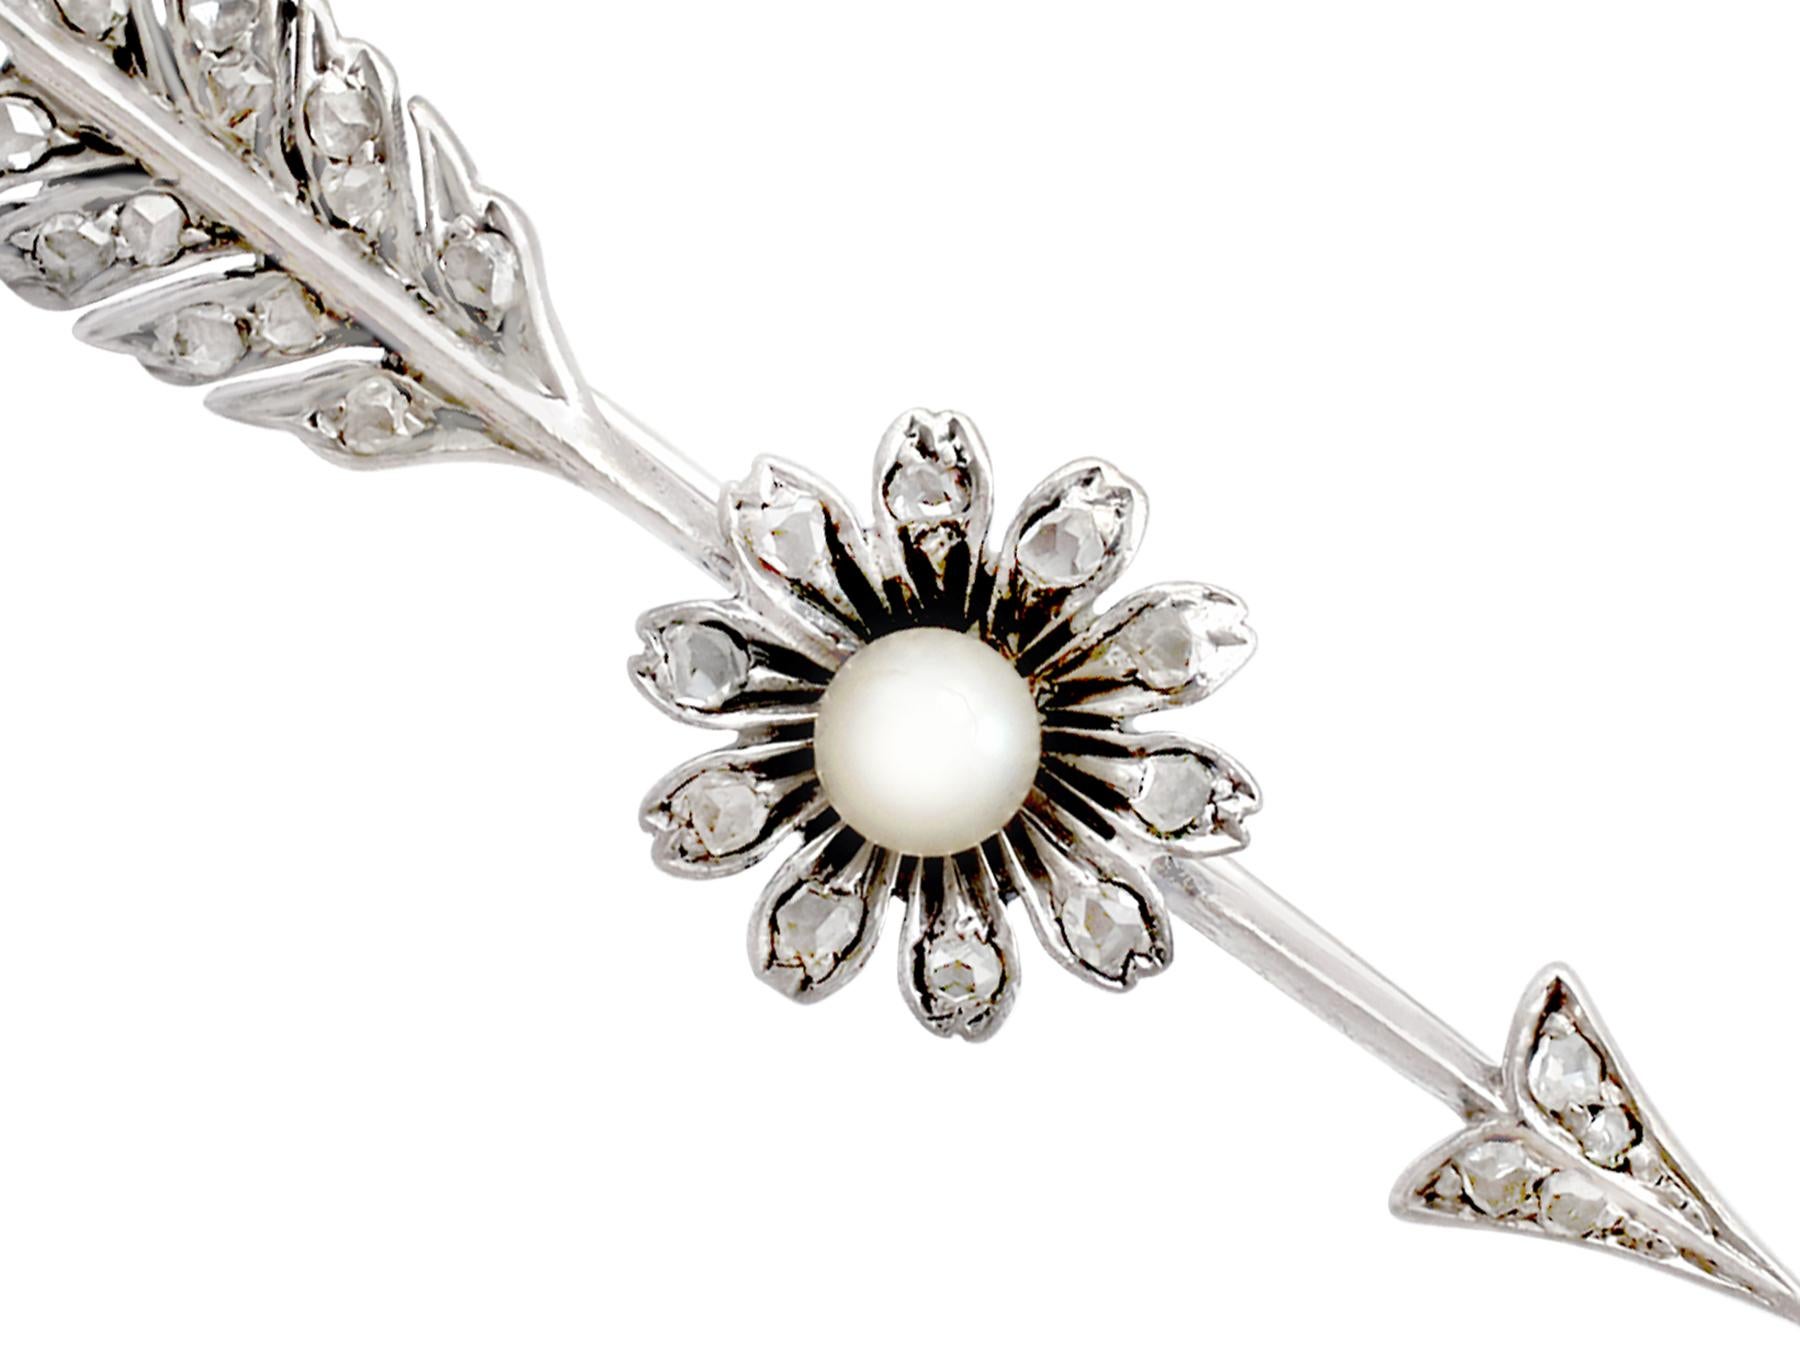 A fine and impressive 0.28 Ct diamond and seed pearl, 9kt white gold and silver set arrow brooch; part of our diverse antique jewelry and estate jewelry collections.

This fine and impressive pearl and diamond arrow brooch has been crafted in 9k